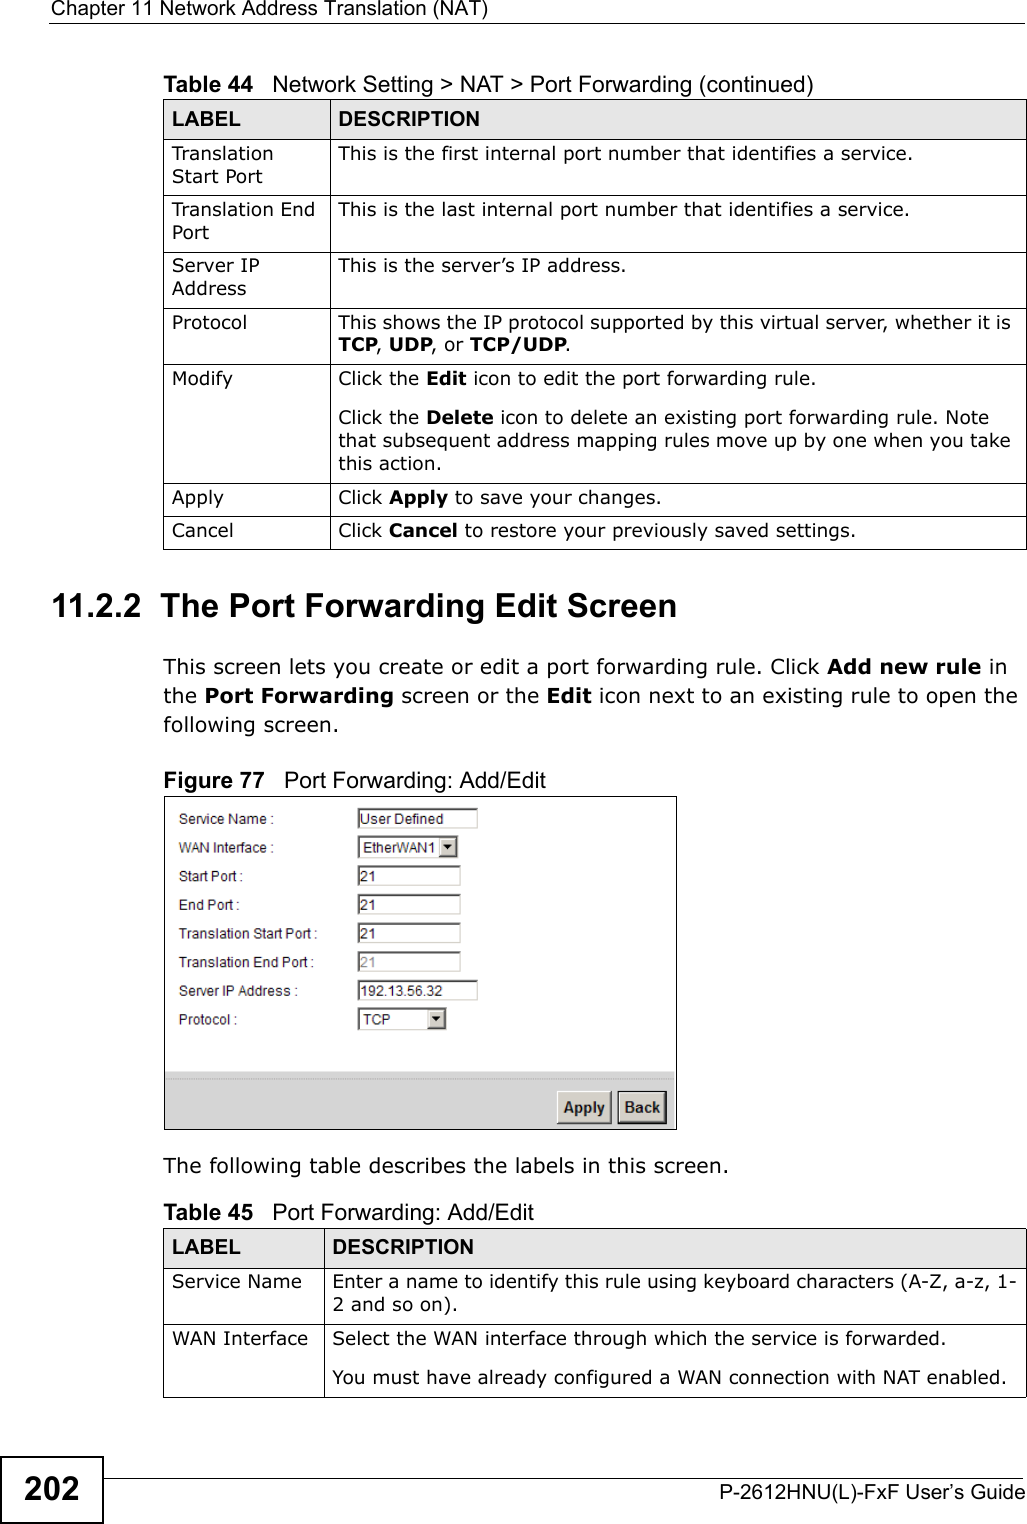 Chapter 11 Network Address Translation (NAT)P-2612HNU(L)-FxF User’s Guide20211.2.2  The Port Forwarding Edit ScreenThis screen lets you create or edit a port forwarding rule. Click Add new rule inthe Port Forwarding screen or the Edit icon next to an existing rule to open thefollowing screen.Figure 77   Port Forwarding: Add/Edit The following table describes the labels in this screen. Translation Start PortThis is the first internal port number that identifies a service.Translation End PortThis is the last internal port number that identifies a service.Server IP AddressThis is the server’s IP address.Protocol This shows the IP protocol supported by this virtual server, whether it is TCP, UDP, or TCP/UDP.Modify Click the Edit icon to edit the port forwarding rule.Click the Delete icon to delete an existing port forwarding rule. Note that subsequent address mapping rules move up by one when you takethis action.Apply Click Apply to save your changes.Cancel Click Cancel to restore your previously saved settings.Table 44   Network Setting &gt; NAT &gt; Port Forwarding (continued)LABEL DESCRIPTIONTable 45   Port Forwarding: Add/EditLABEL DESCRIPTIONService Name Enter a name to identify this rule using keyboard characters (A-Z, a-z, 1-2 and so on). WAN Interface Select the WAN interface through which the service is forwarded.You must have already configured a WAN connection with NAT enabled.